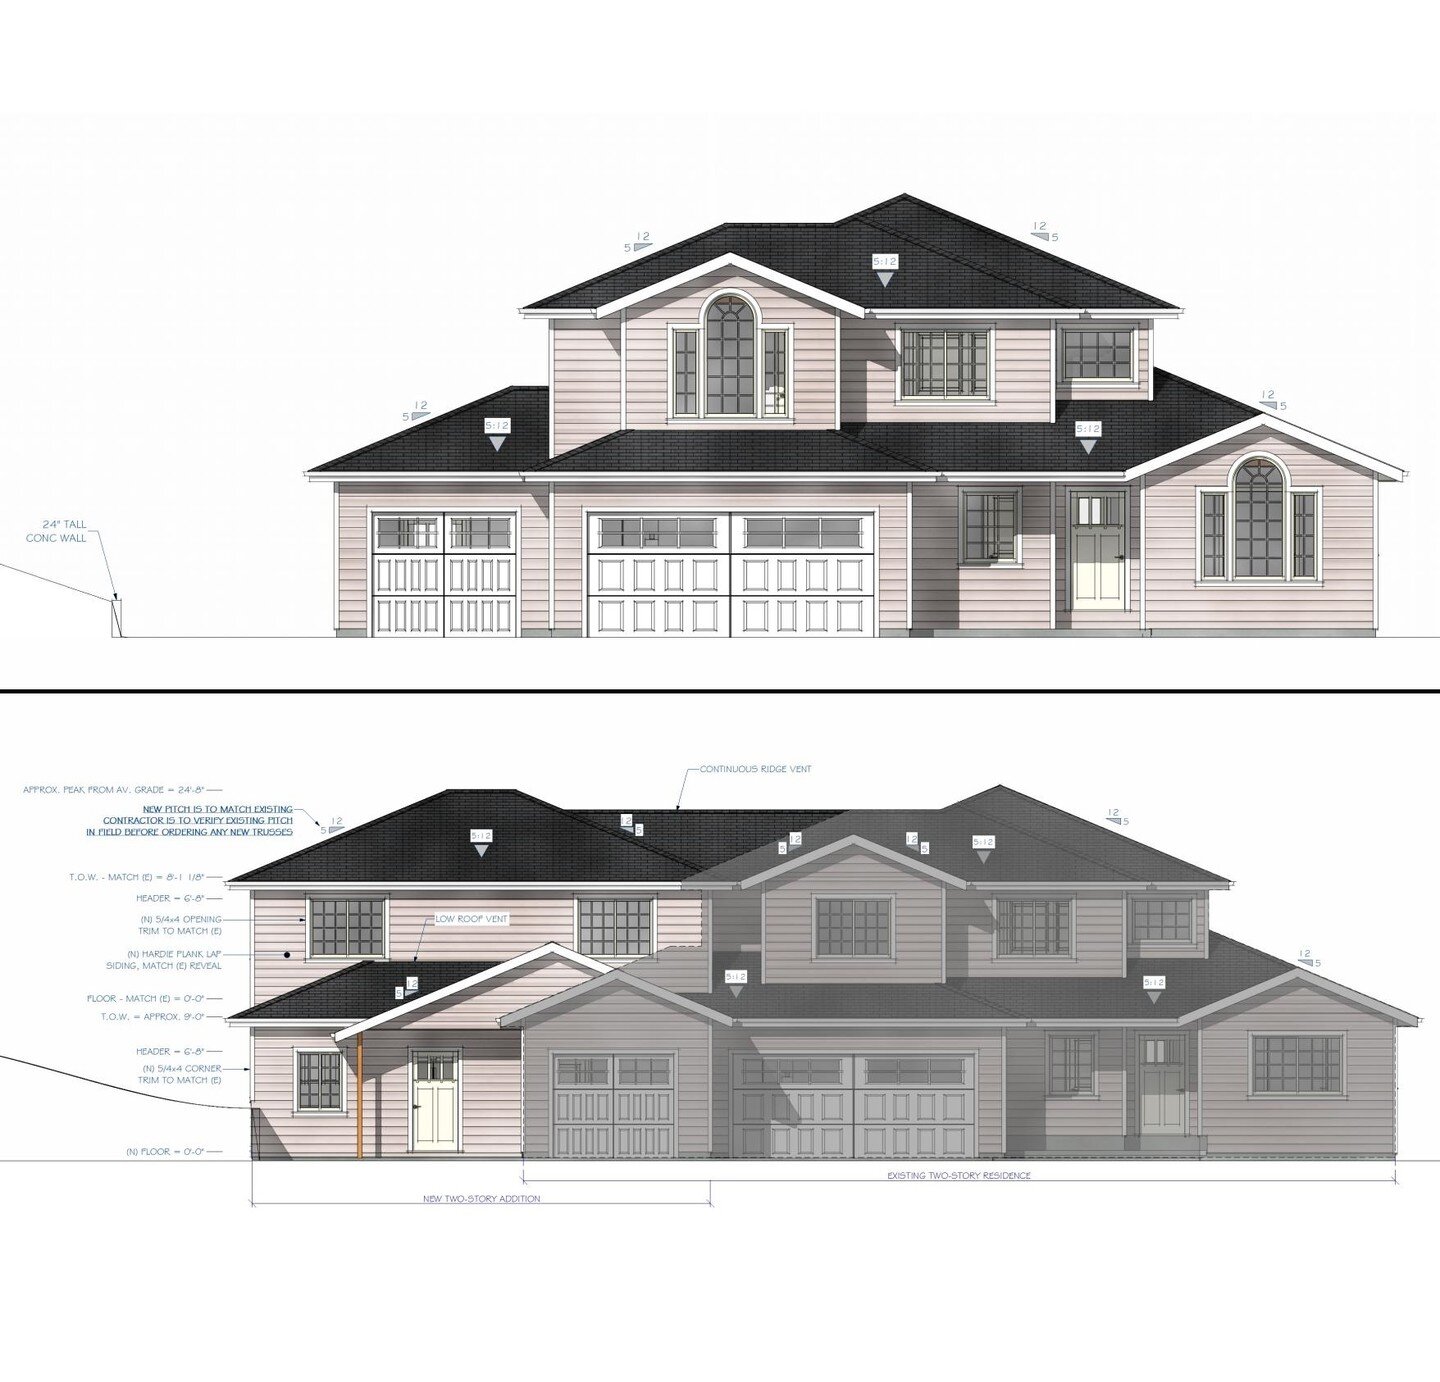 Major transformation, changing this single family residence into a multi-generational home. We can help you figure out the best ways to modify your home utilizing our collaborative 3d design process.

#multigenerational #multigenerationalliving #3dde